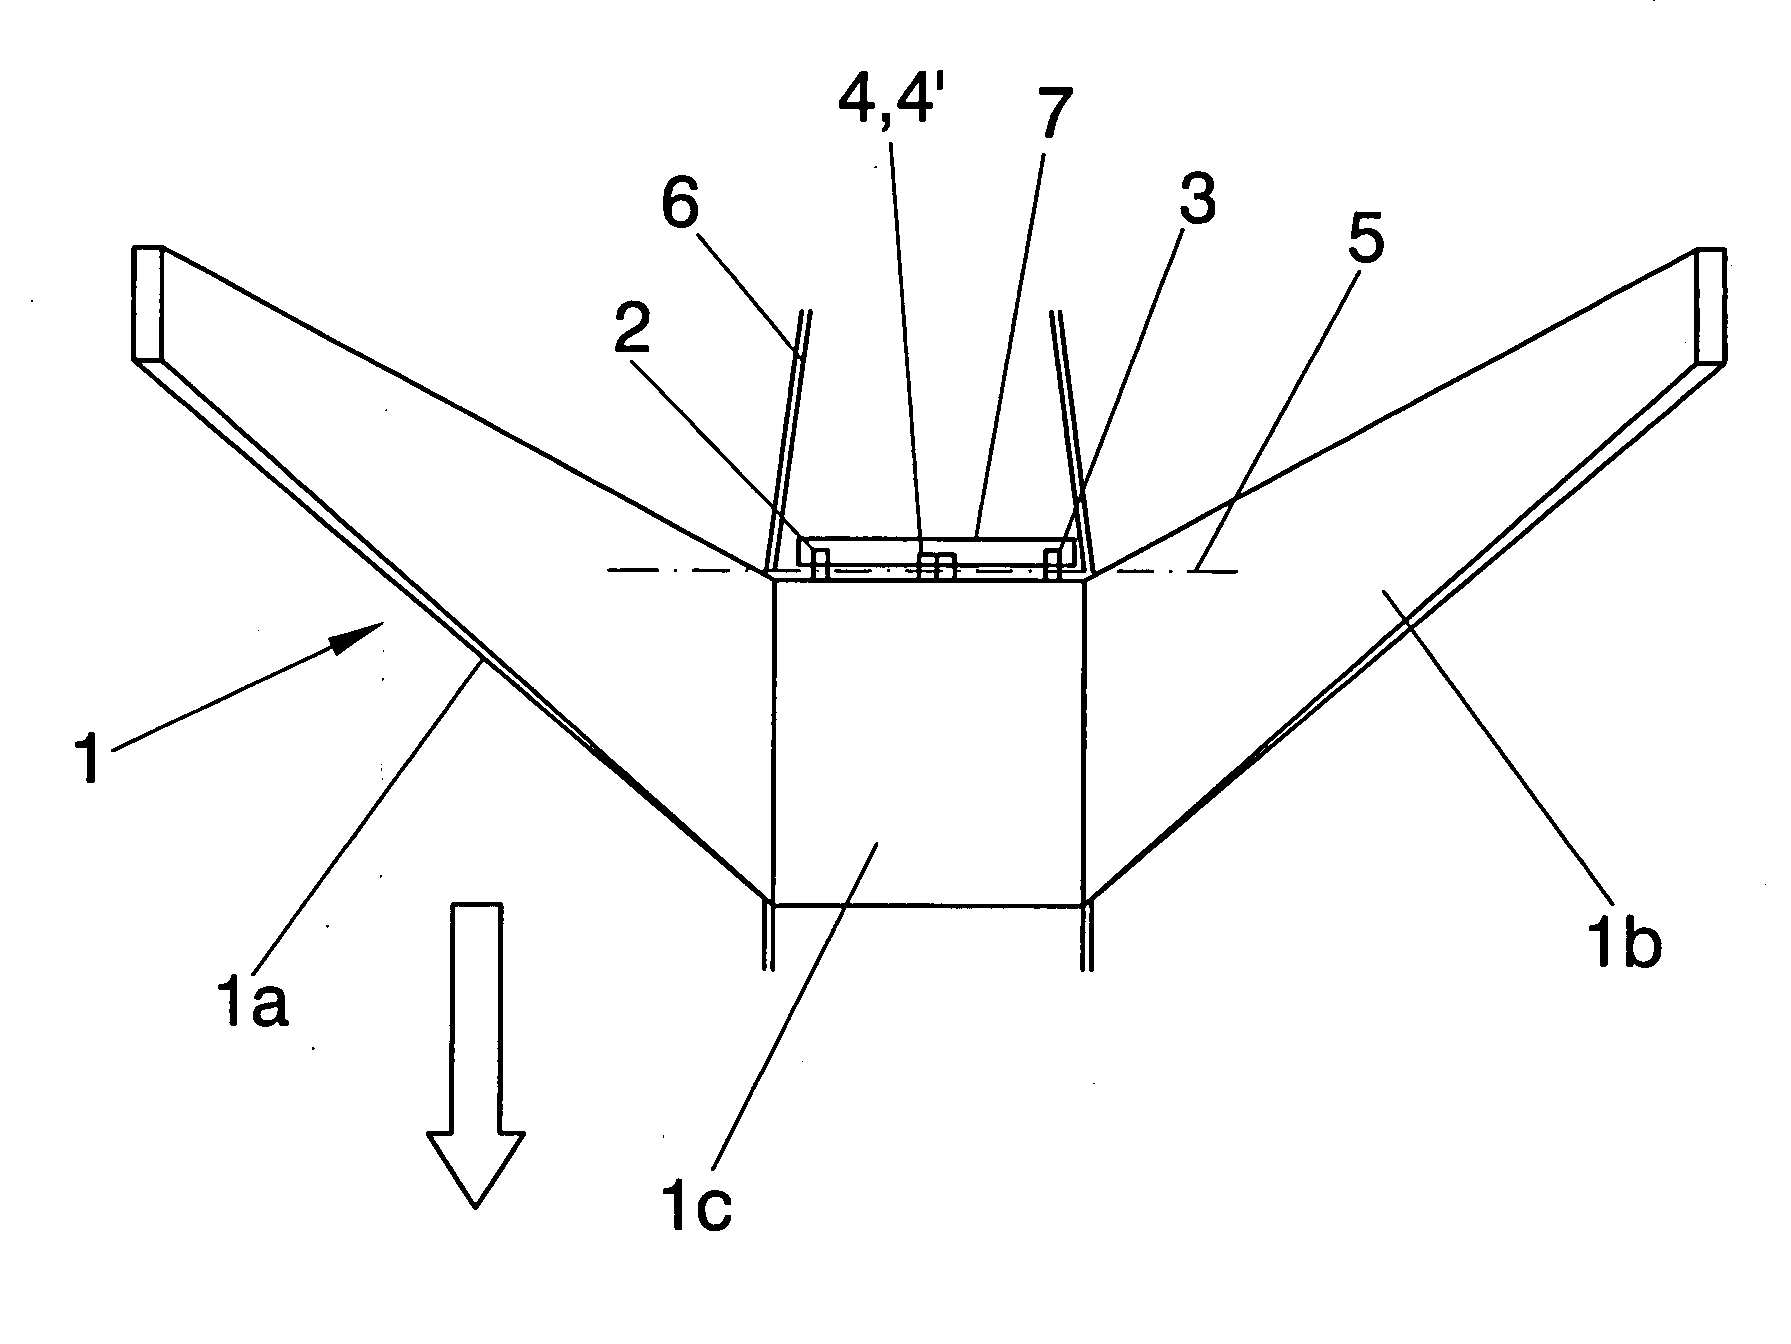 Pivoting coupling system for a large dihedral empennage to the tail fuselage of an aircraft